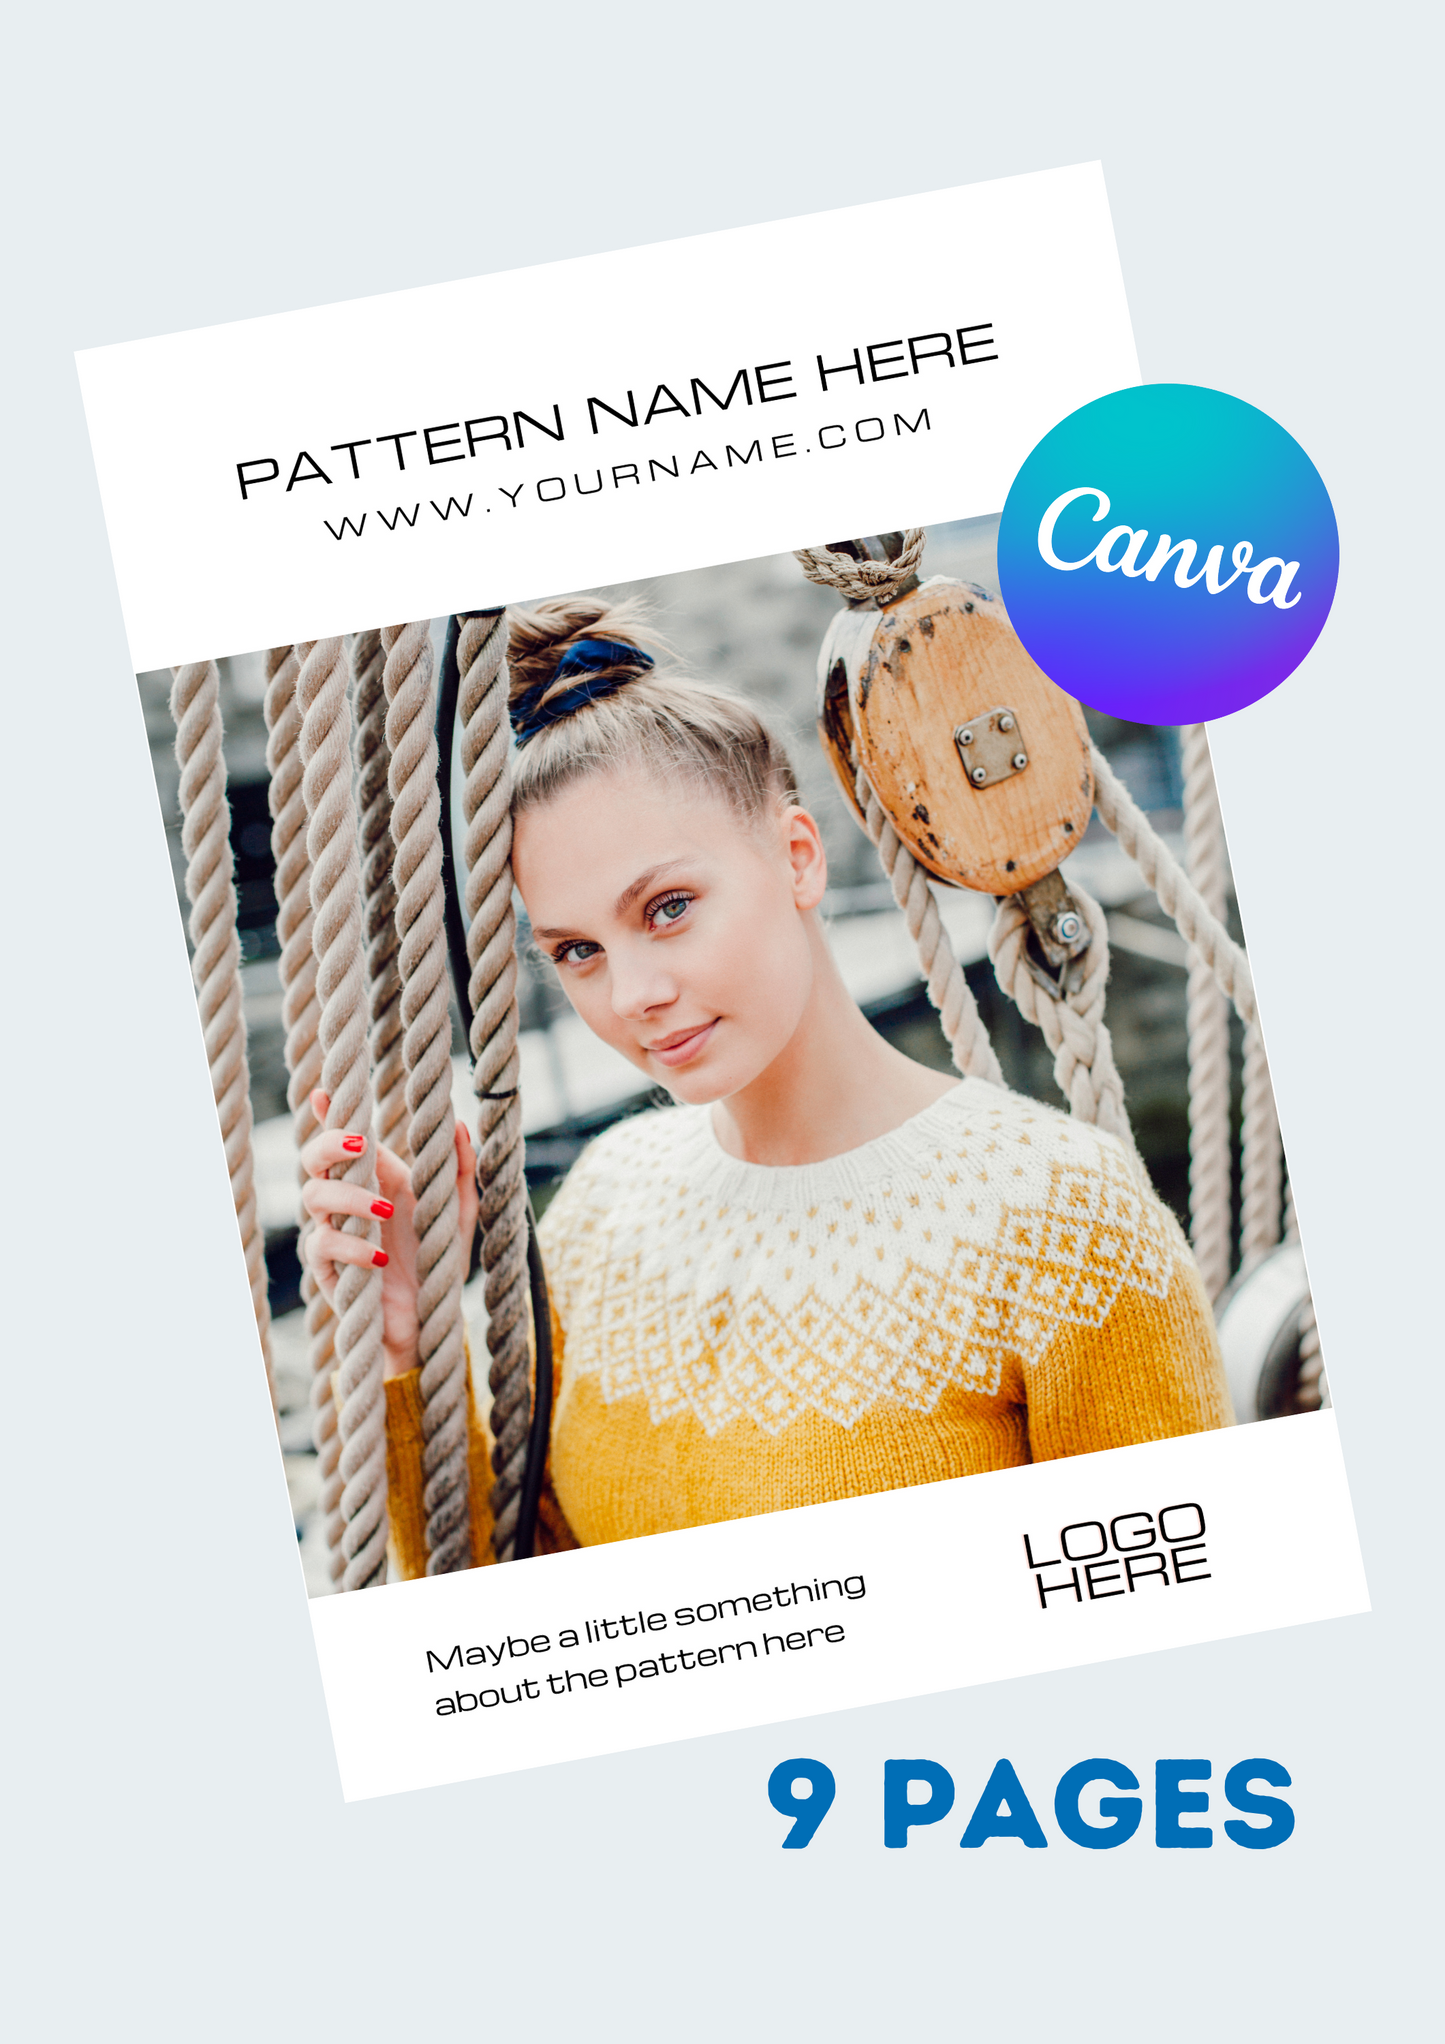 PATTERN TEMPLATE - the ultimate tool for all knit and crochet pattern writers